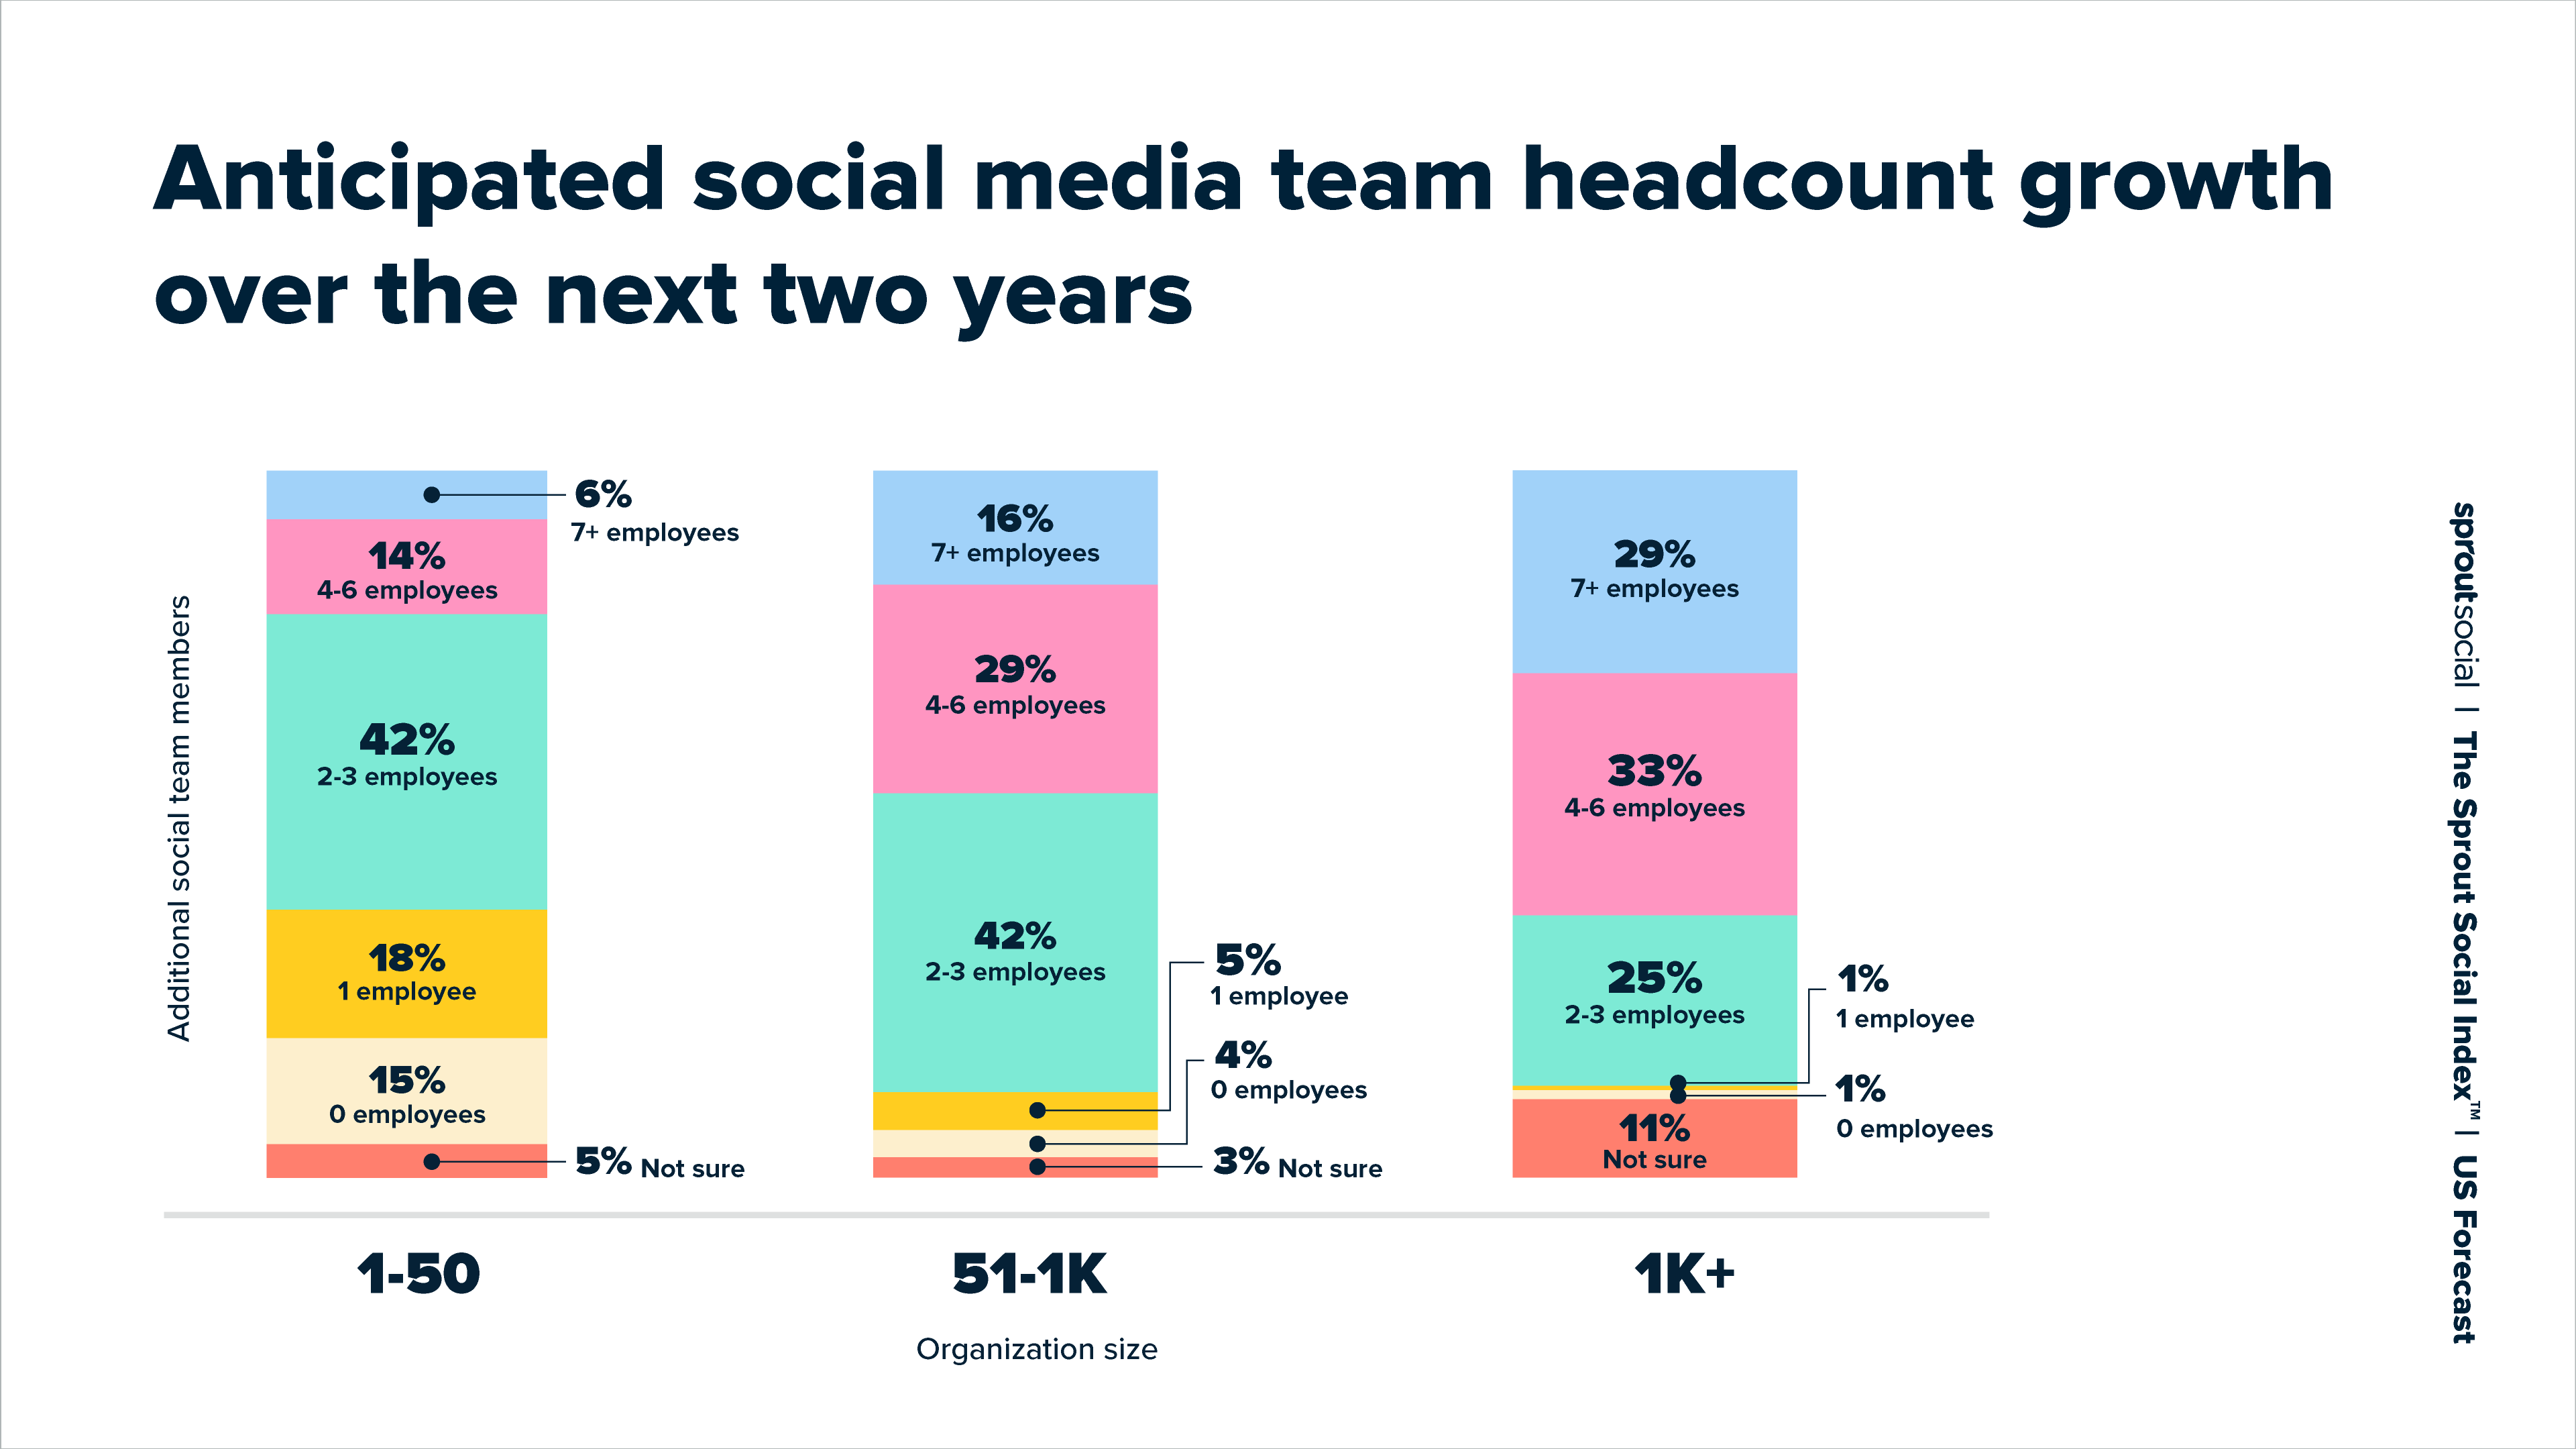 A chart sharing the anticipated social media team headcount growth over the next two years. 